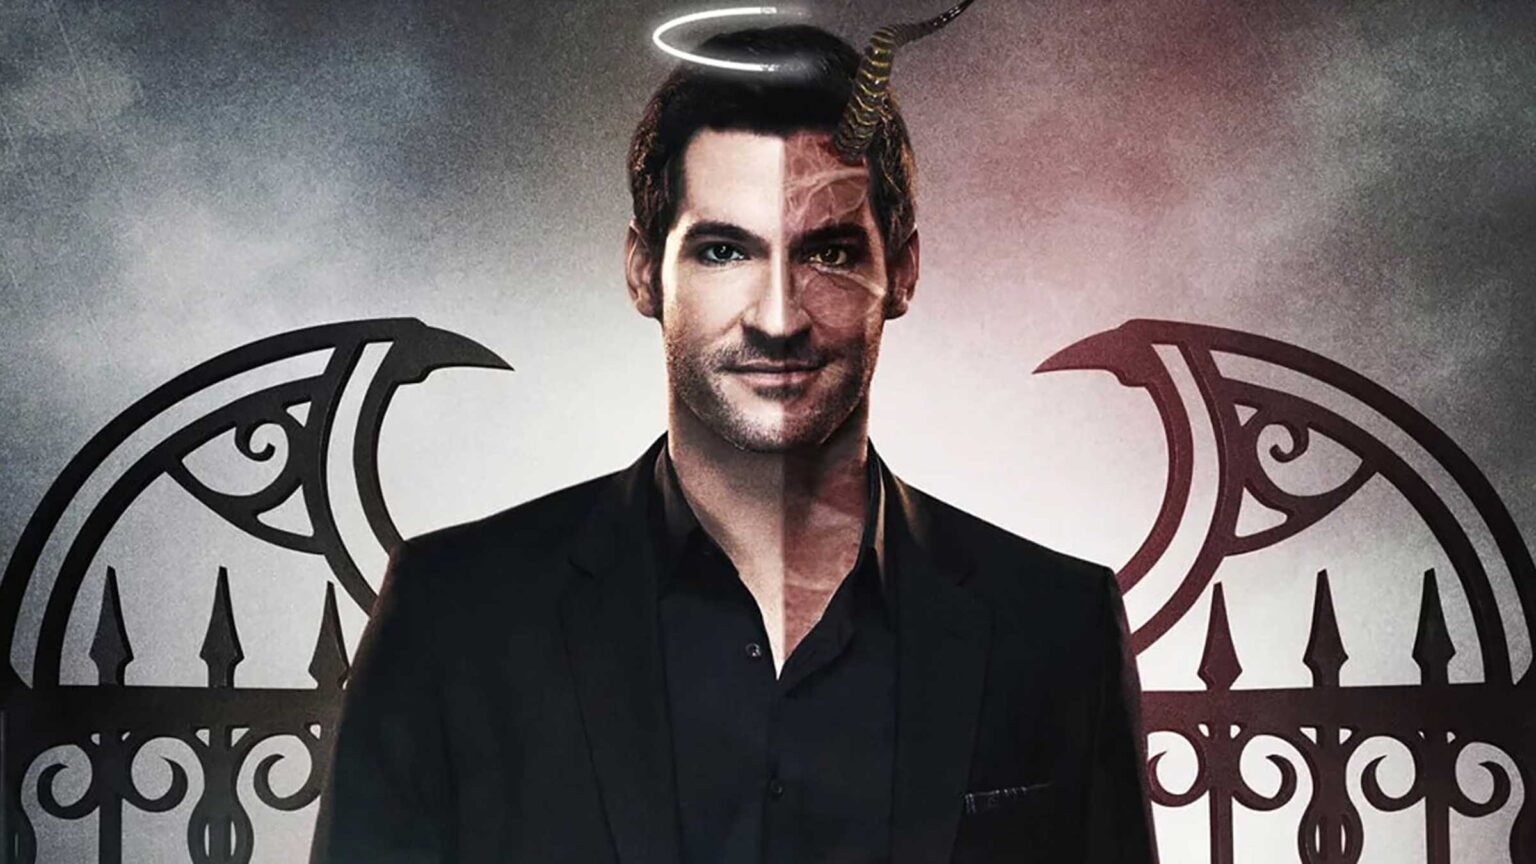 While 'Lucifer' fans wait for the triumphant Netflix return, let’s look back on some of our favorite moments of the series.